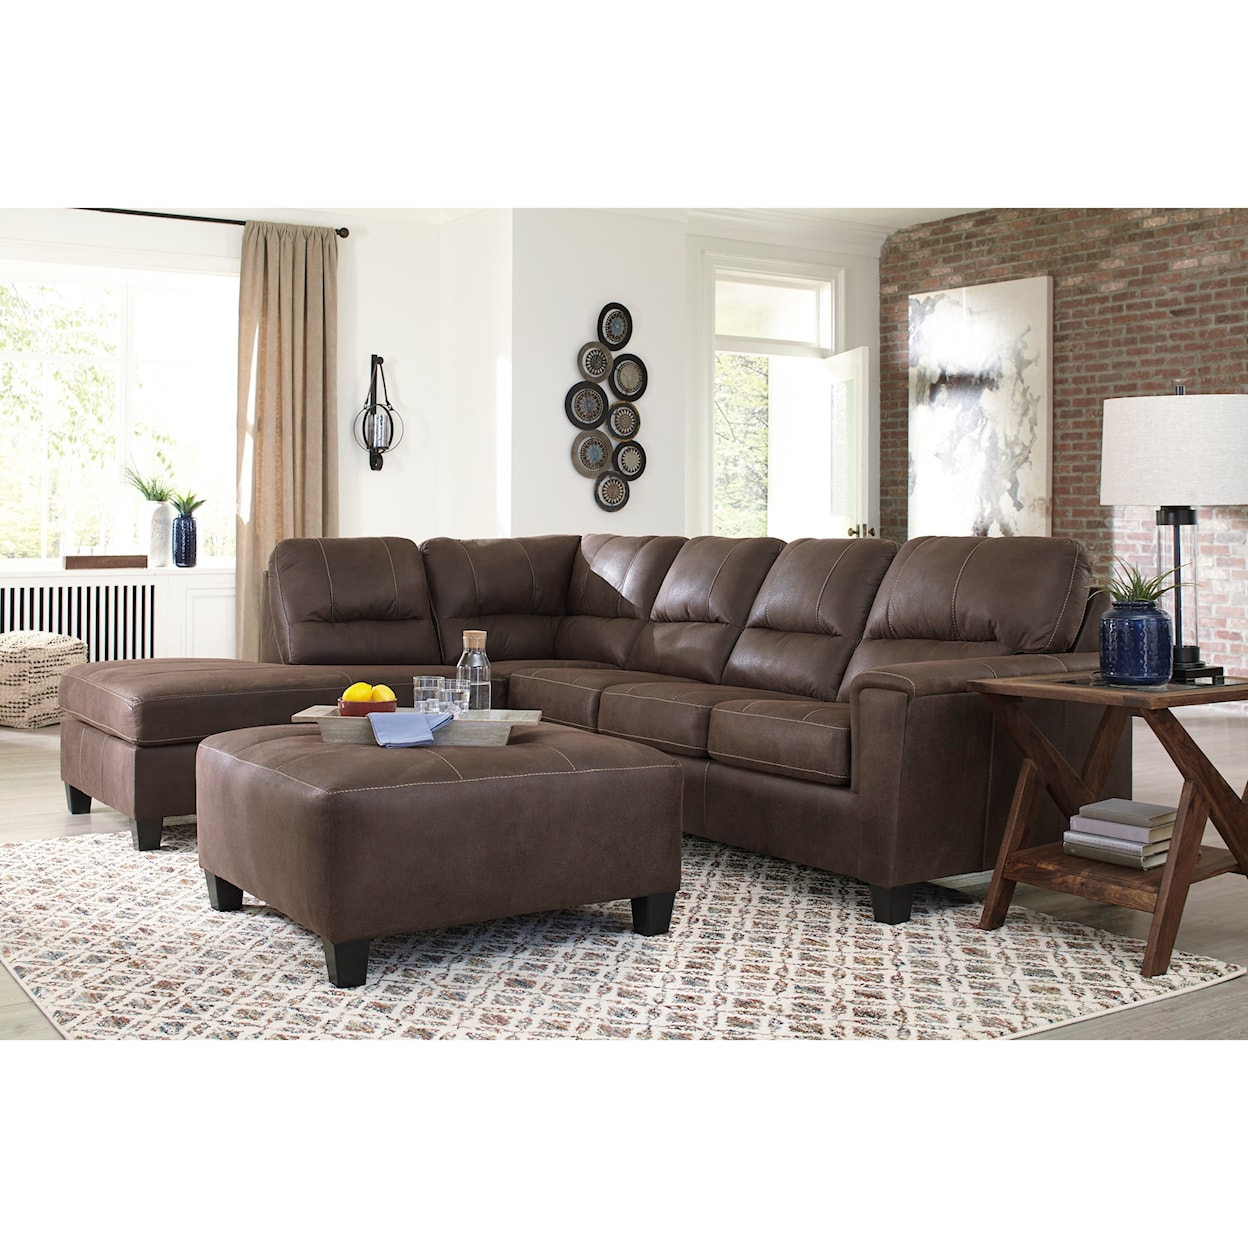 Ashley Furniture Signature Design Navi 2-Piece Sectional with Left Chaise